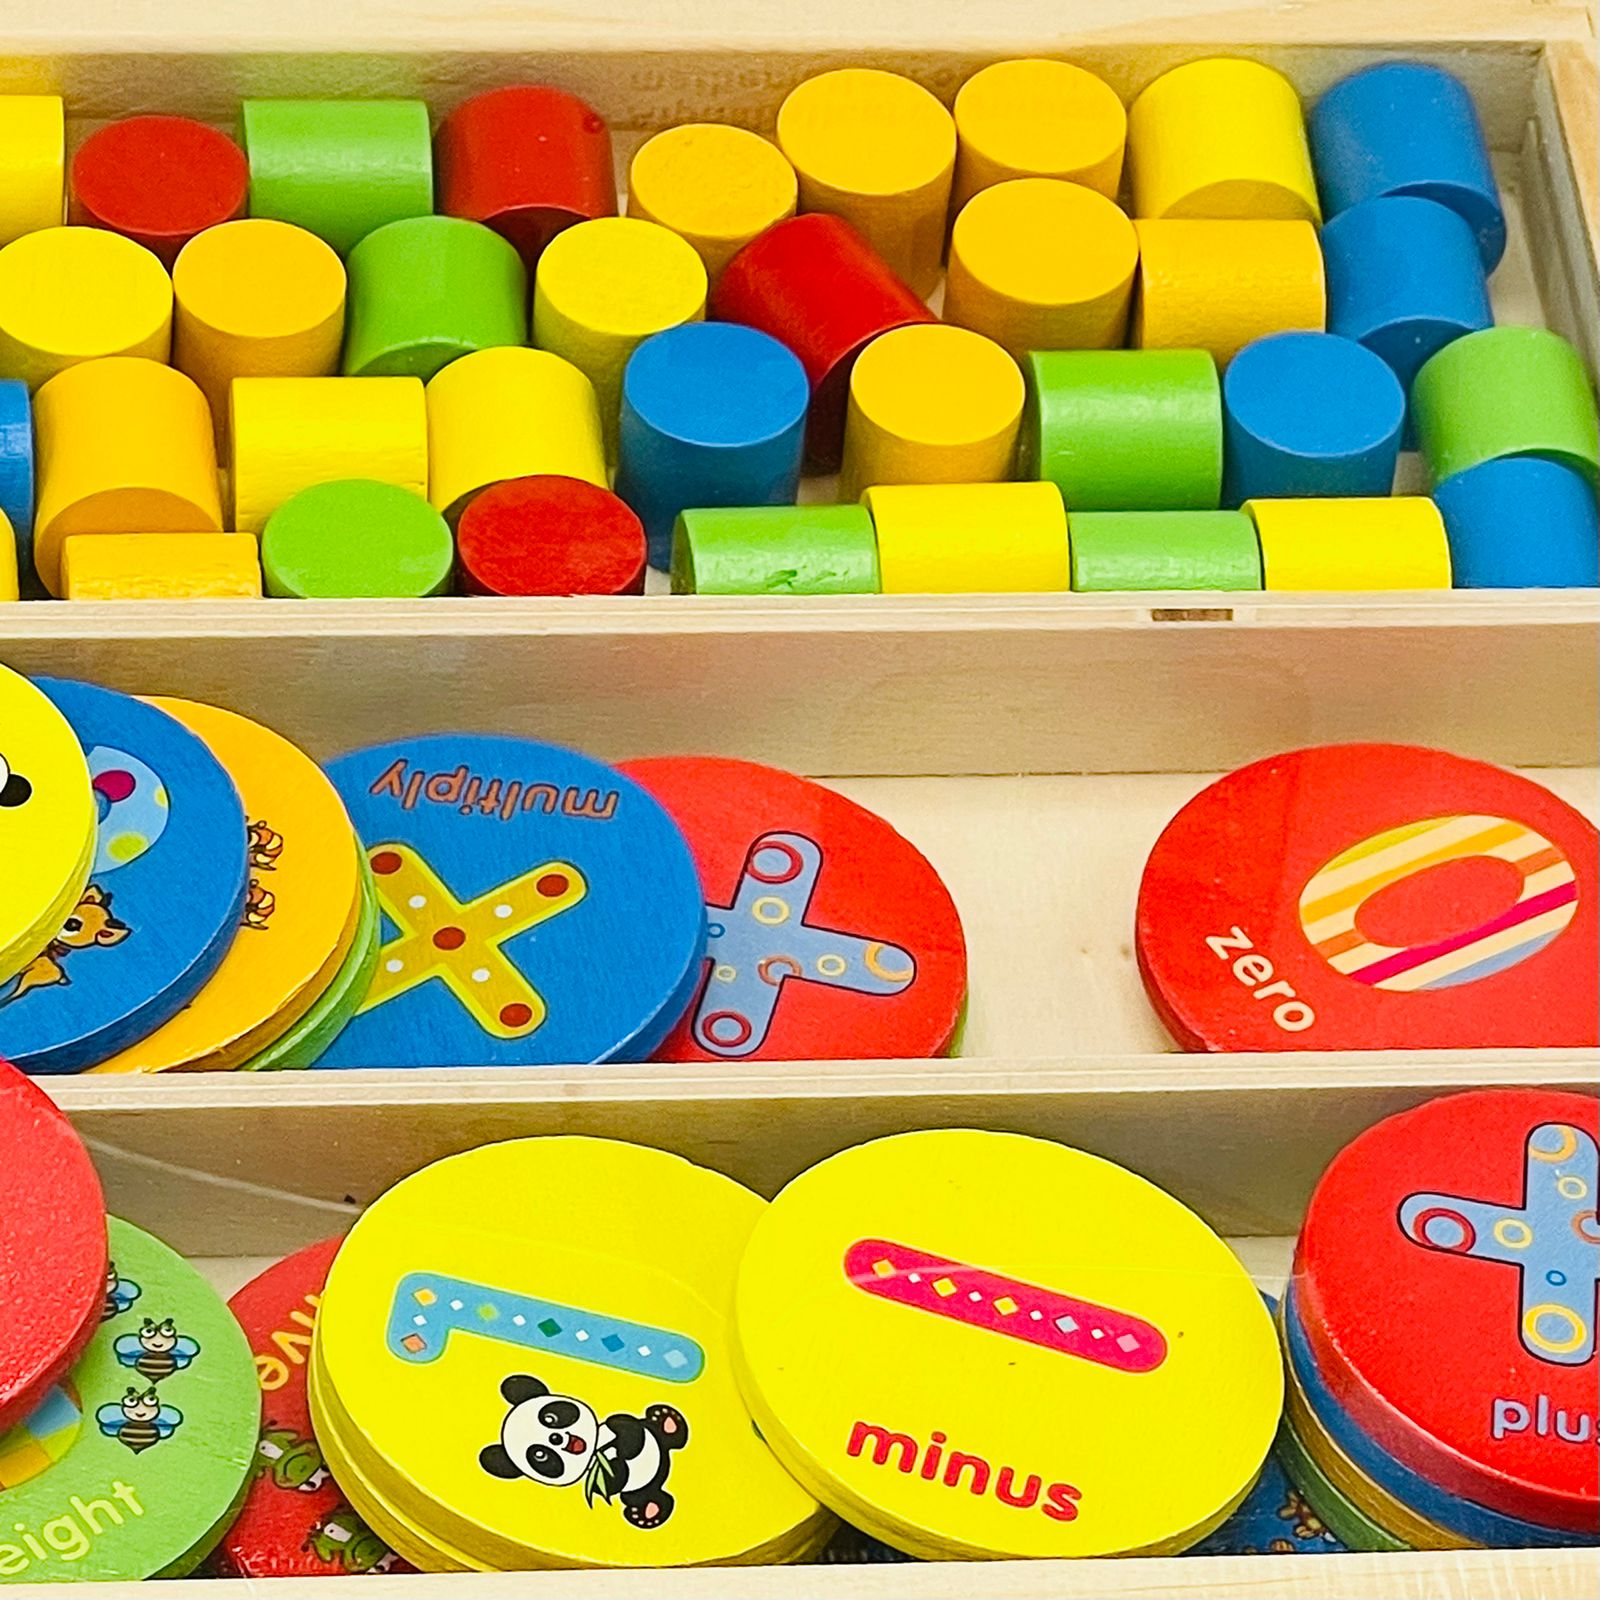 Wooden Puzzle Multifunctional Wafer Learning and  Educational Toys For Children